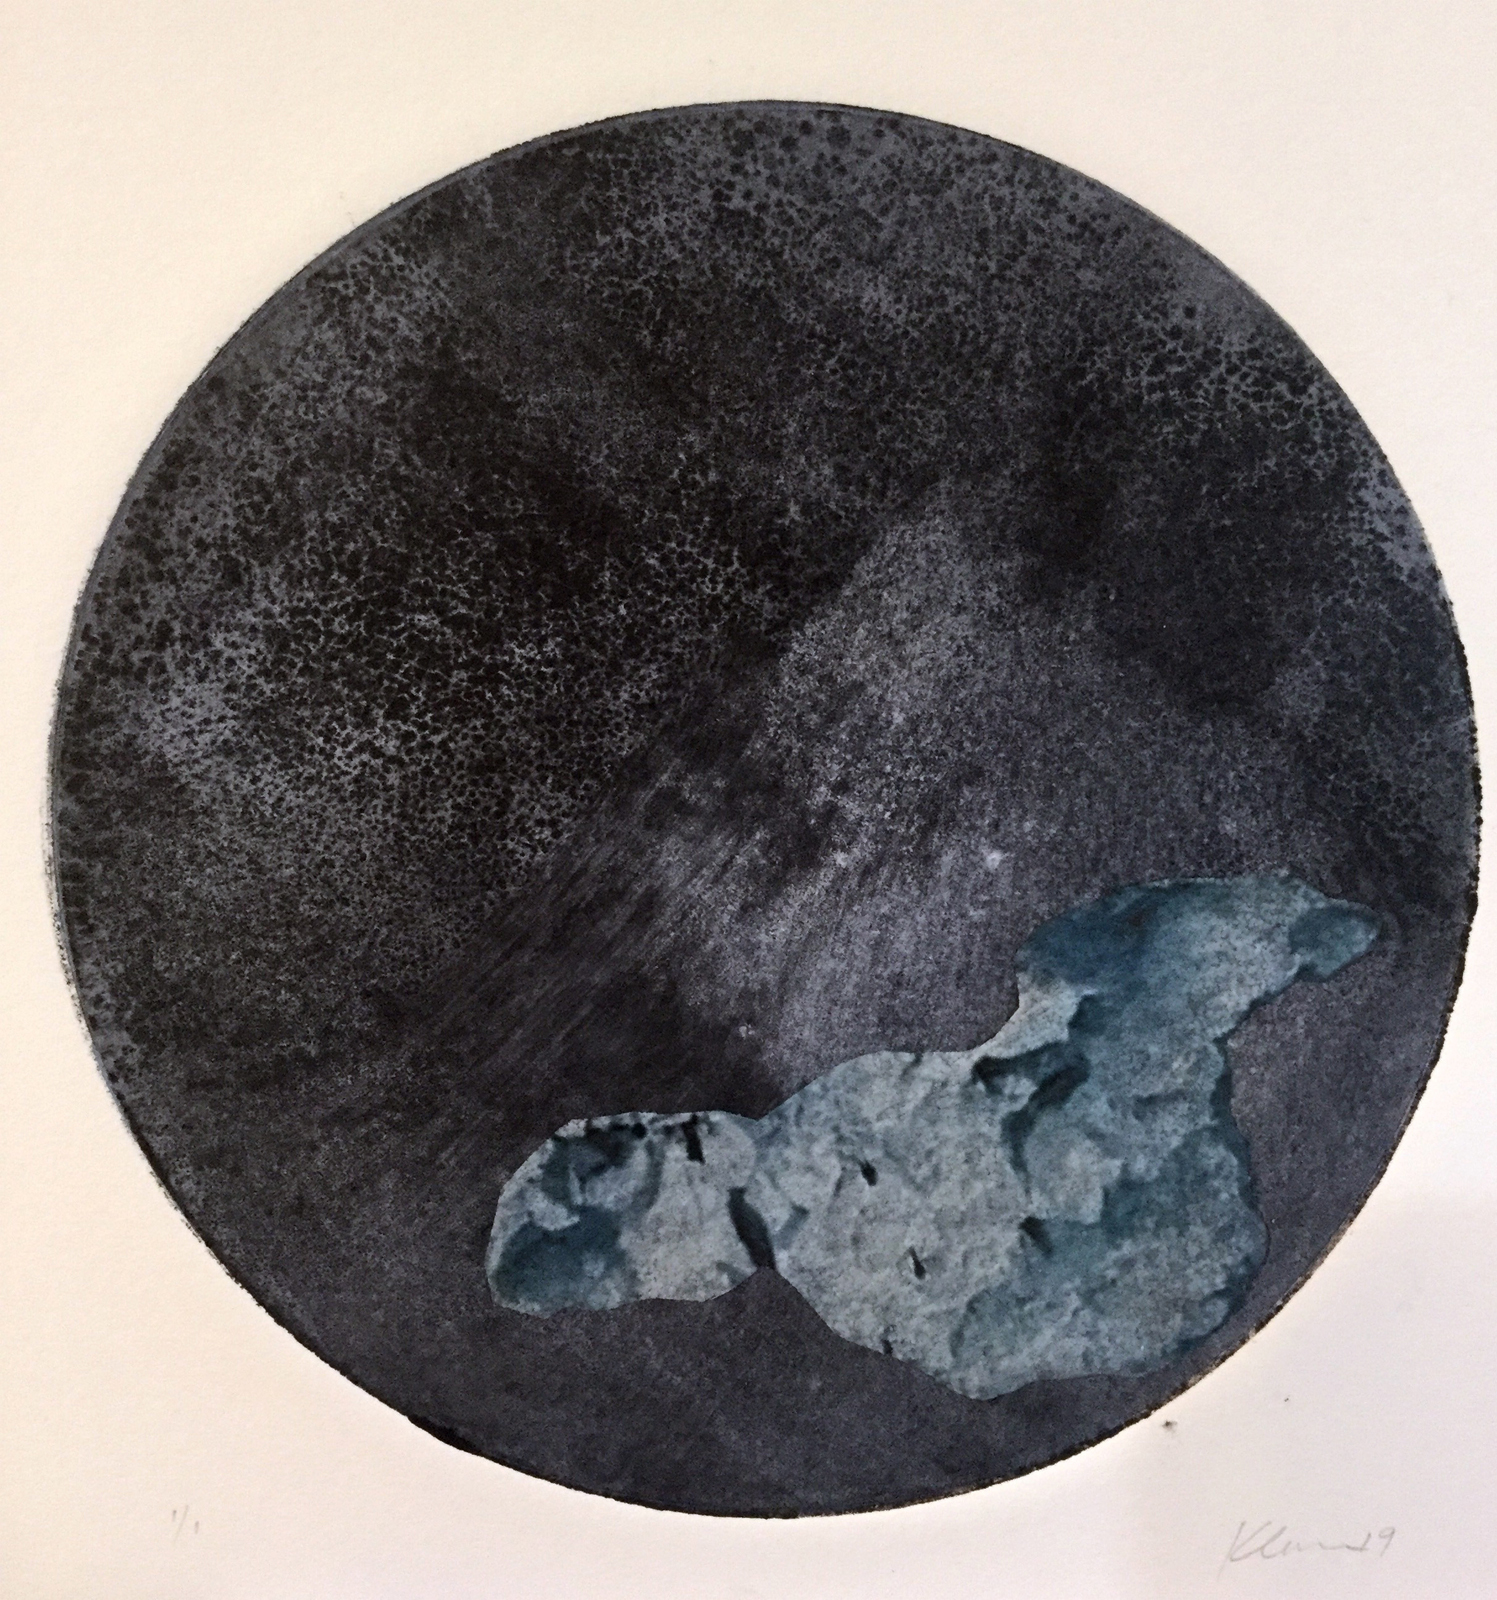  Kathline Carr,  “Asteroid”   Monotype, Chine-Colle, 8"x 8 inches (round) 